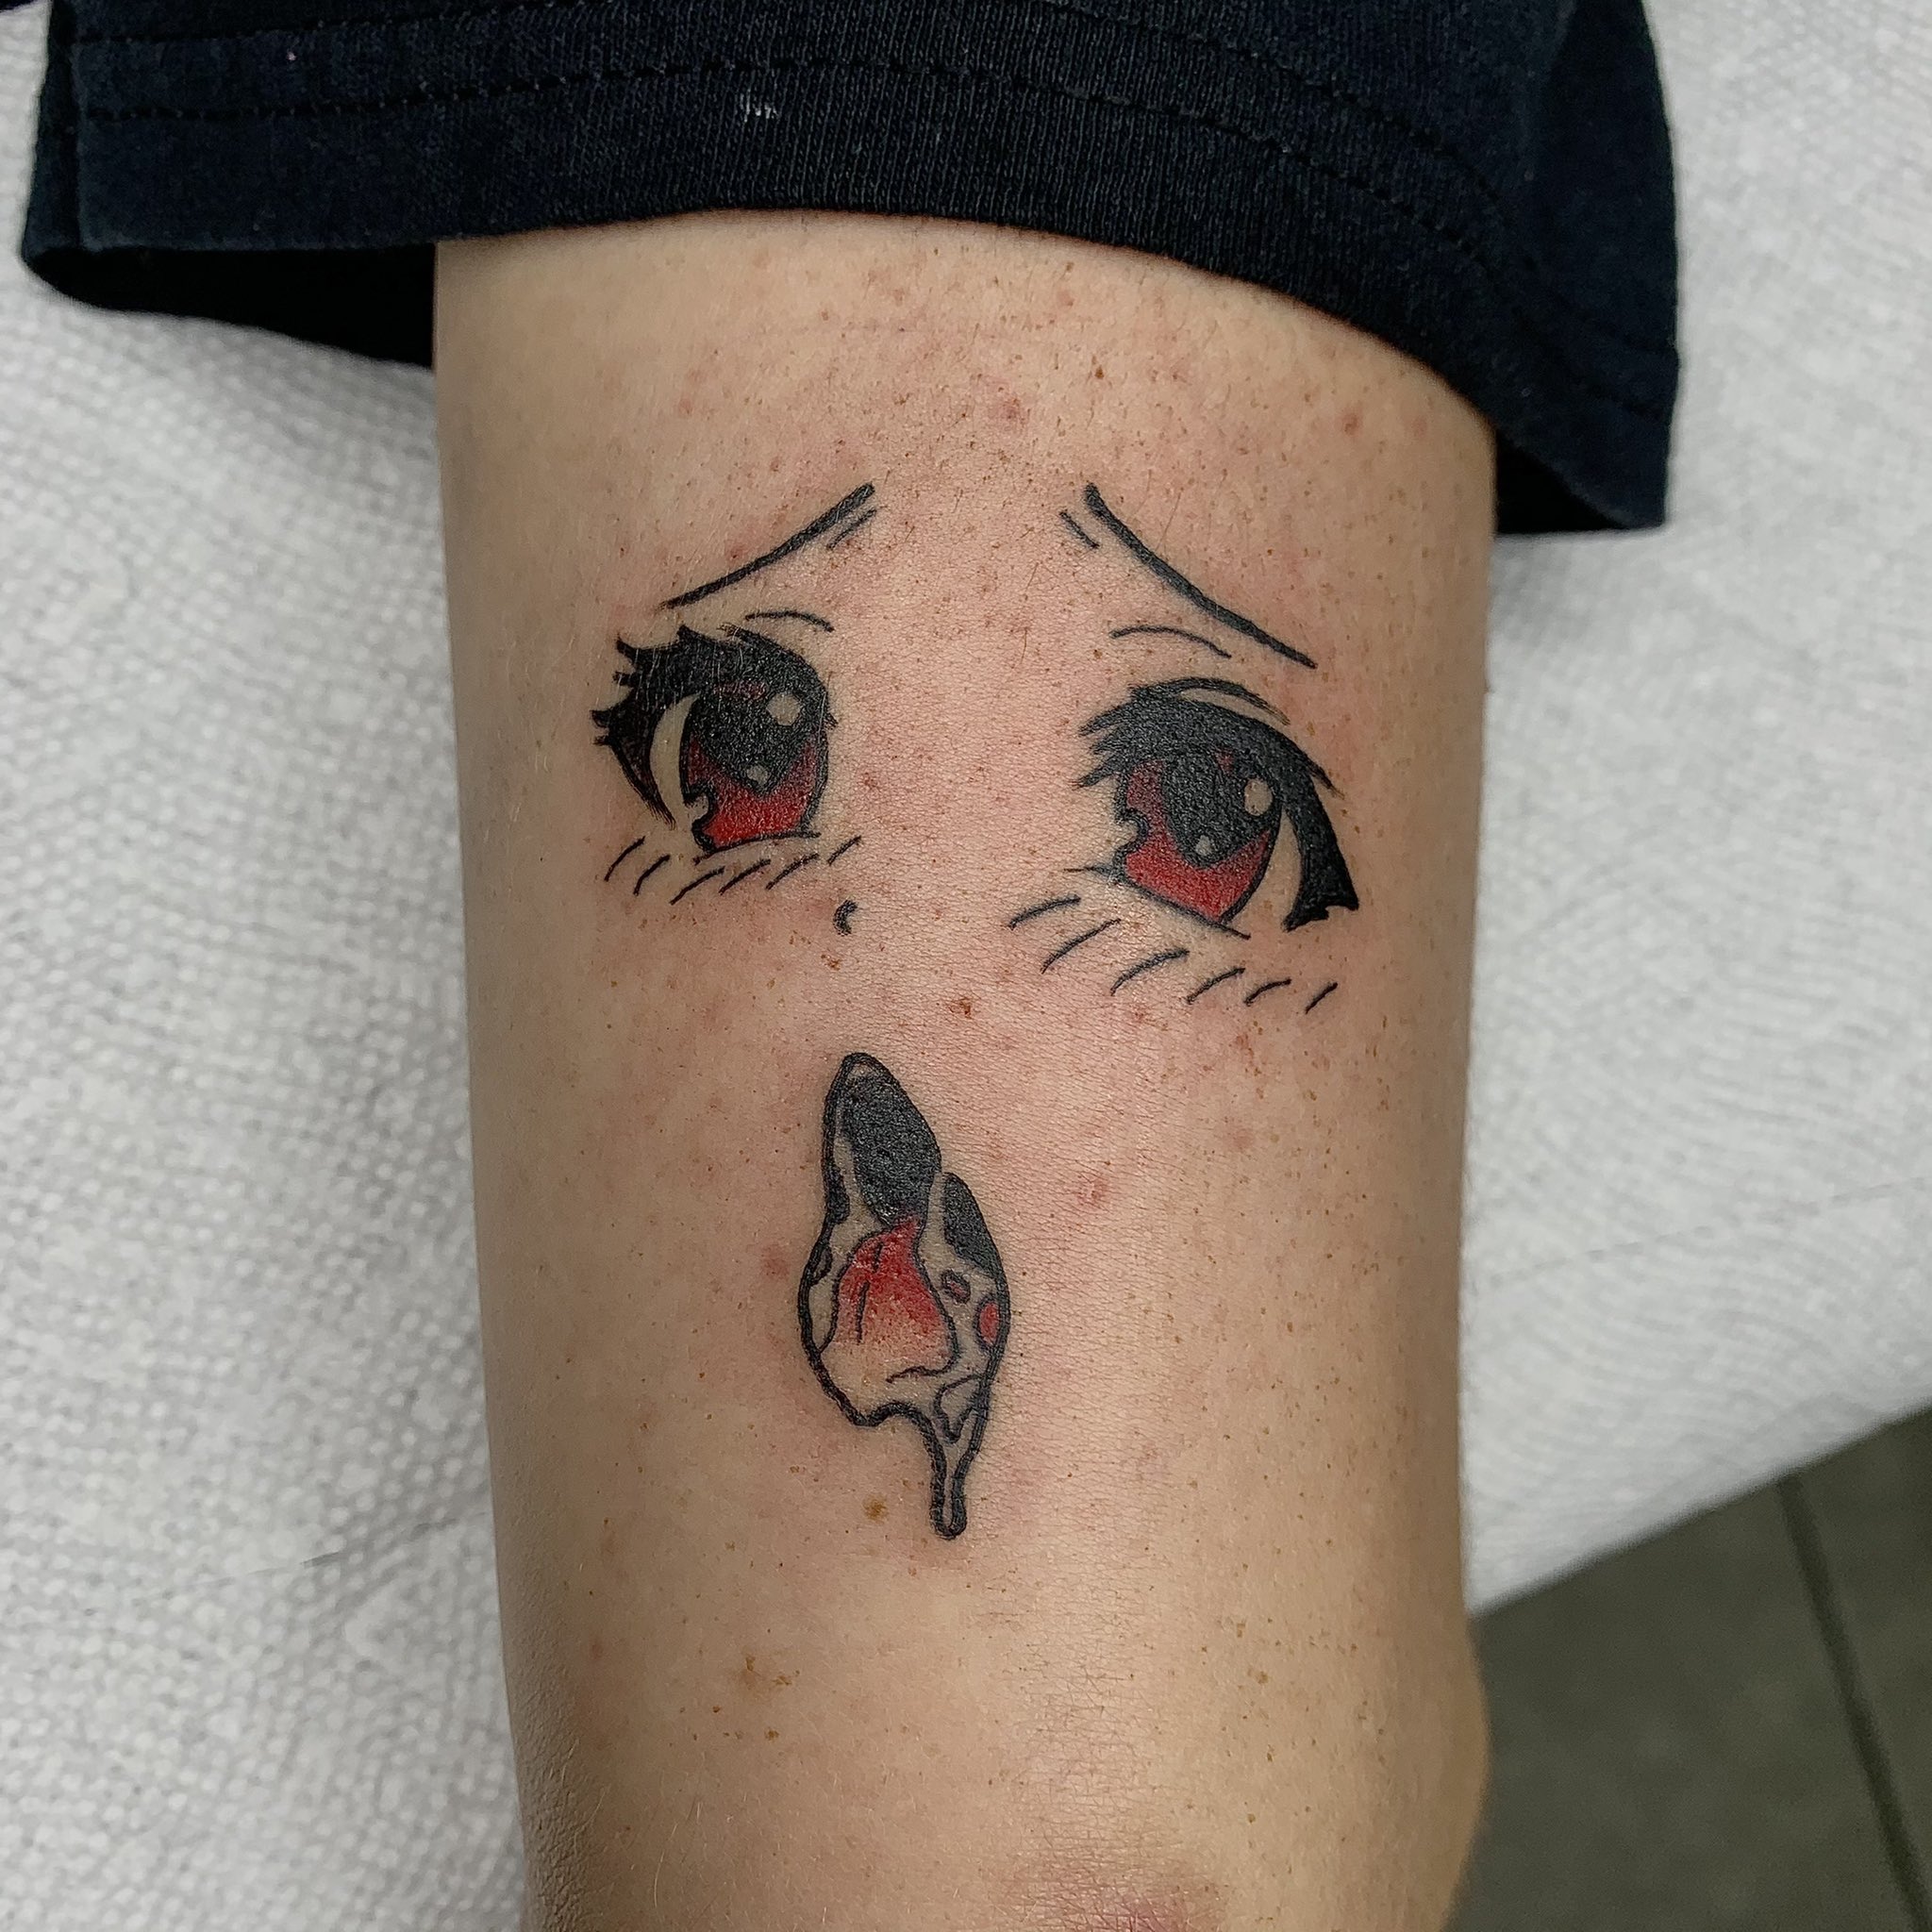 What's better than an anime... - Anna Tattoos & Illustration | Facebook